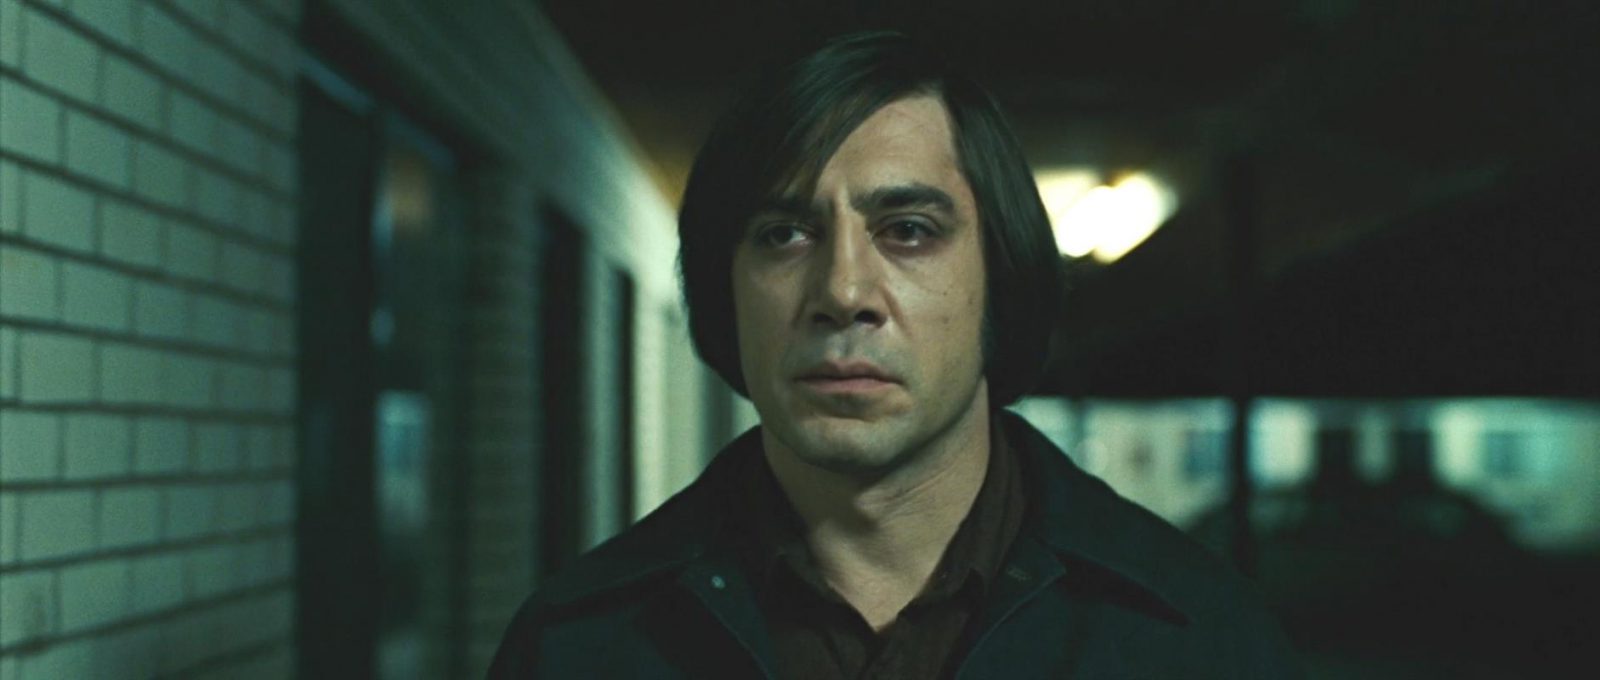 7 films comme No Country For Old Men a voir absolument 0dO7sfvg 1 1